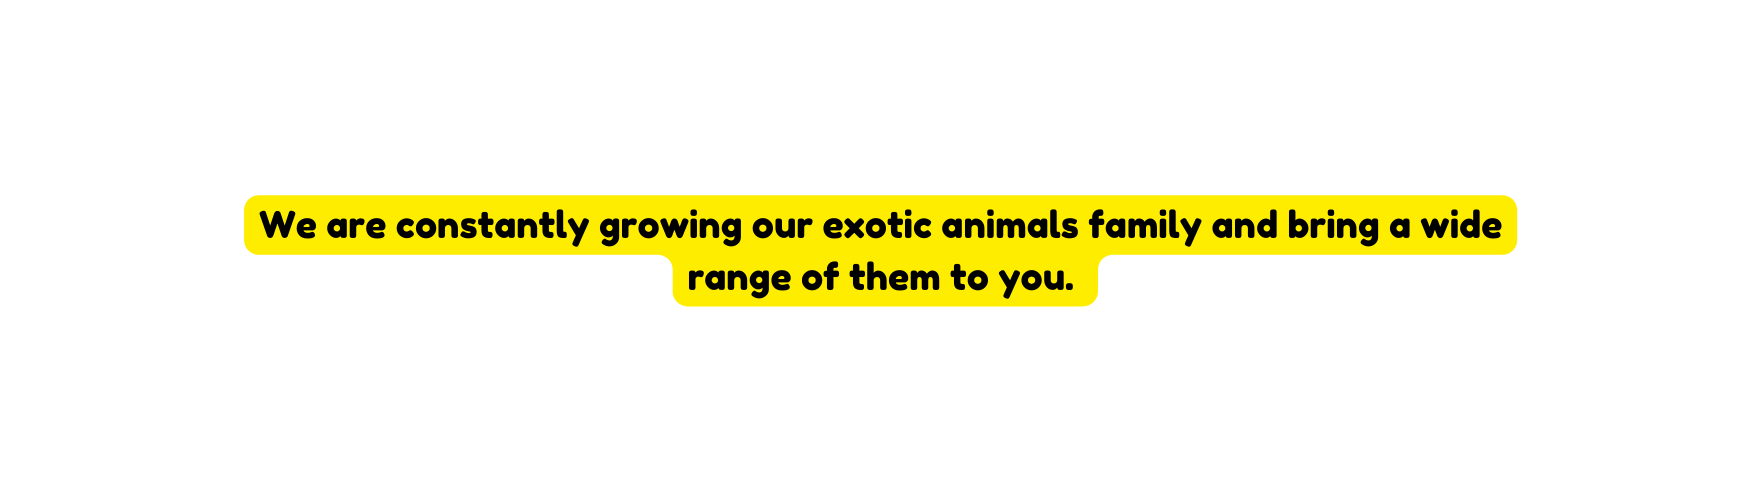 We are constantly growing our exotic animals family and bring a wide range of them to you